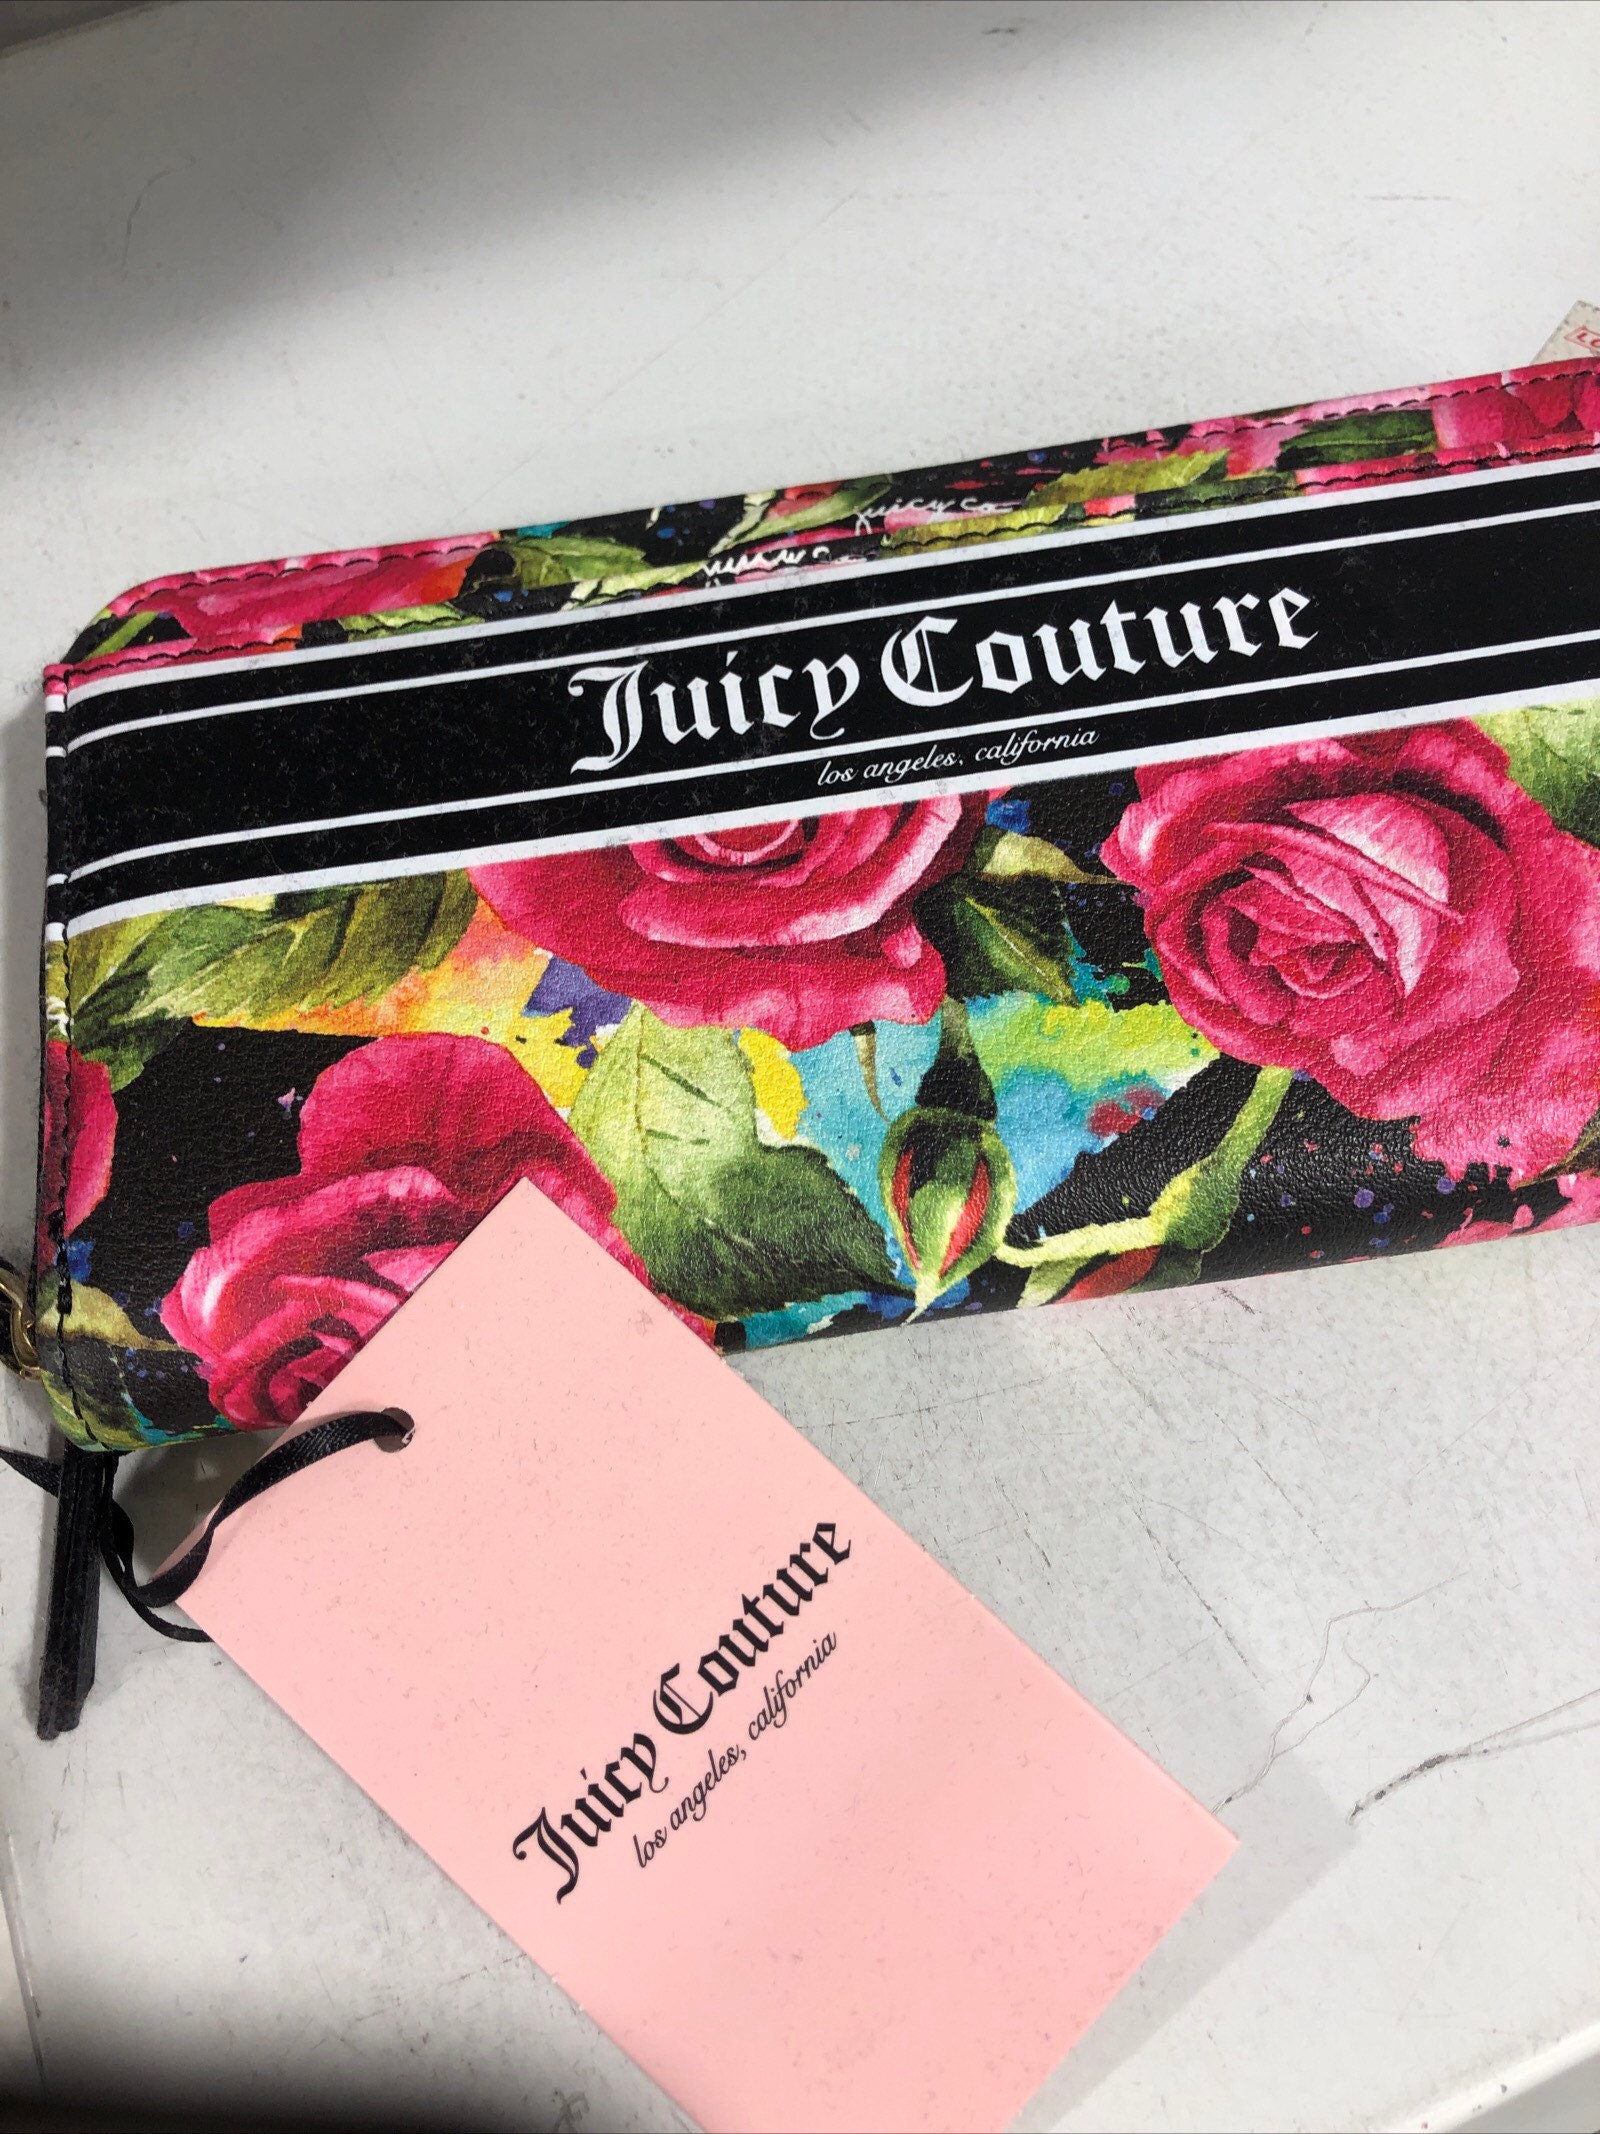 Brand New Juicy Couture Floral Heart Shaped Wristlet Wallet Coin Purse  Pouch Bag